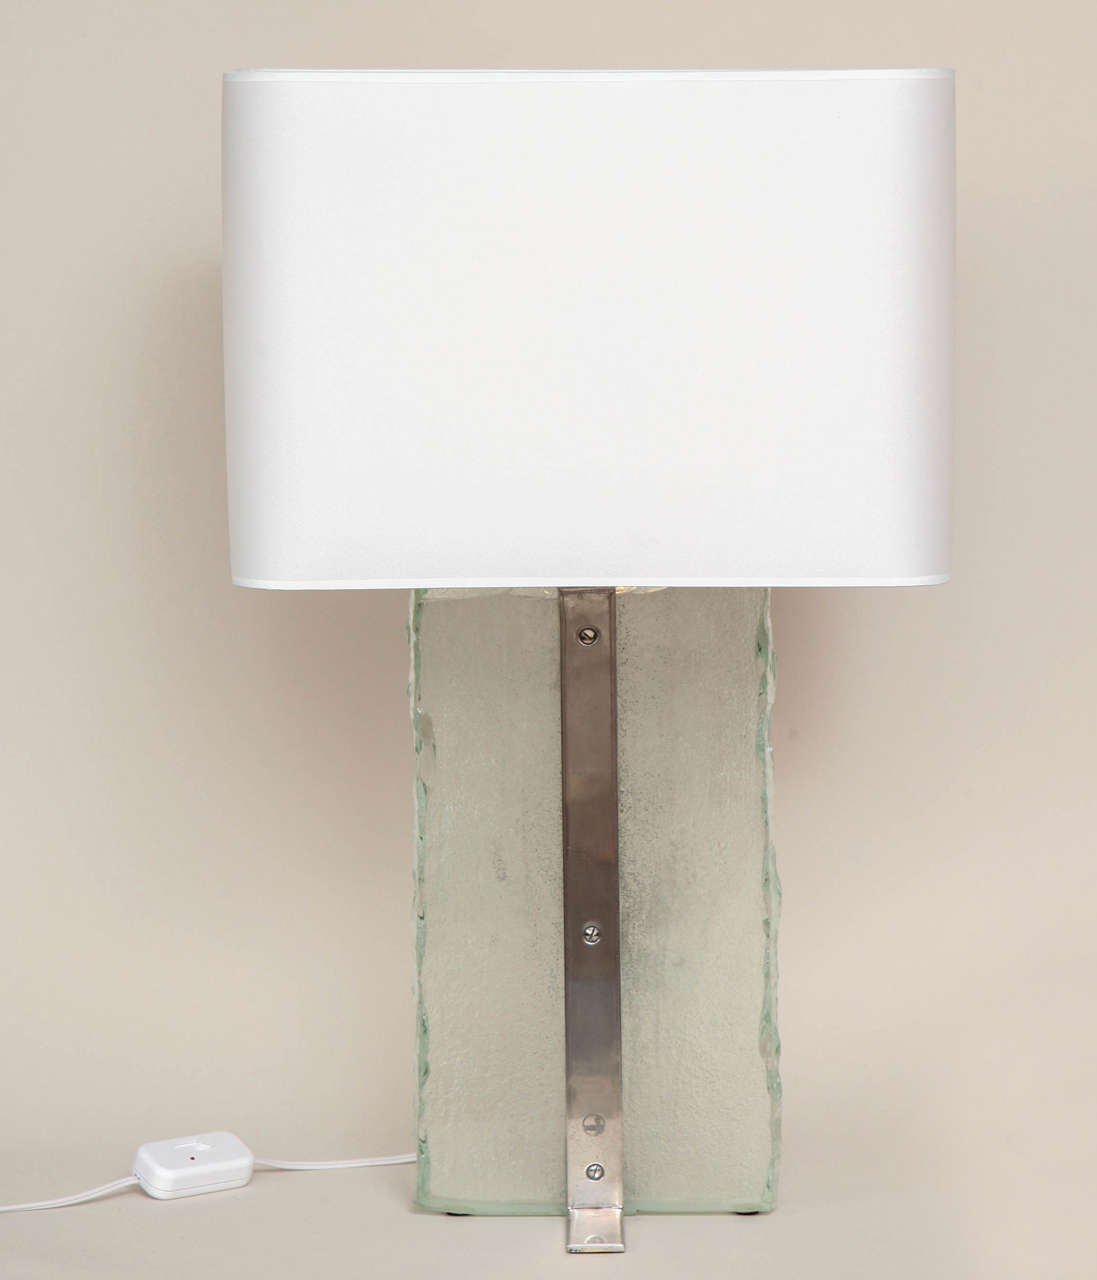 With a large glass slab which is smooth on one side and sand-blasted on the other supported by a nickeled brass Stand and with parchment paper shade. With sockets for two bulbs and with original French electrical components, but newly rewired to